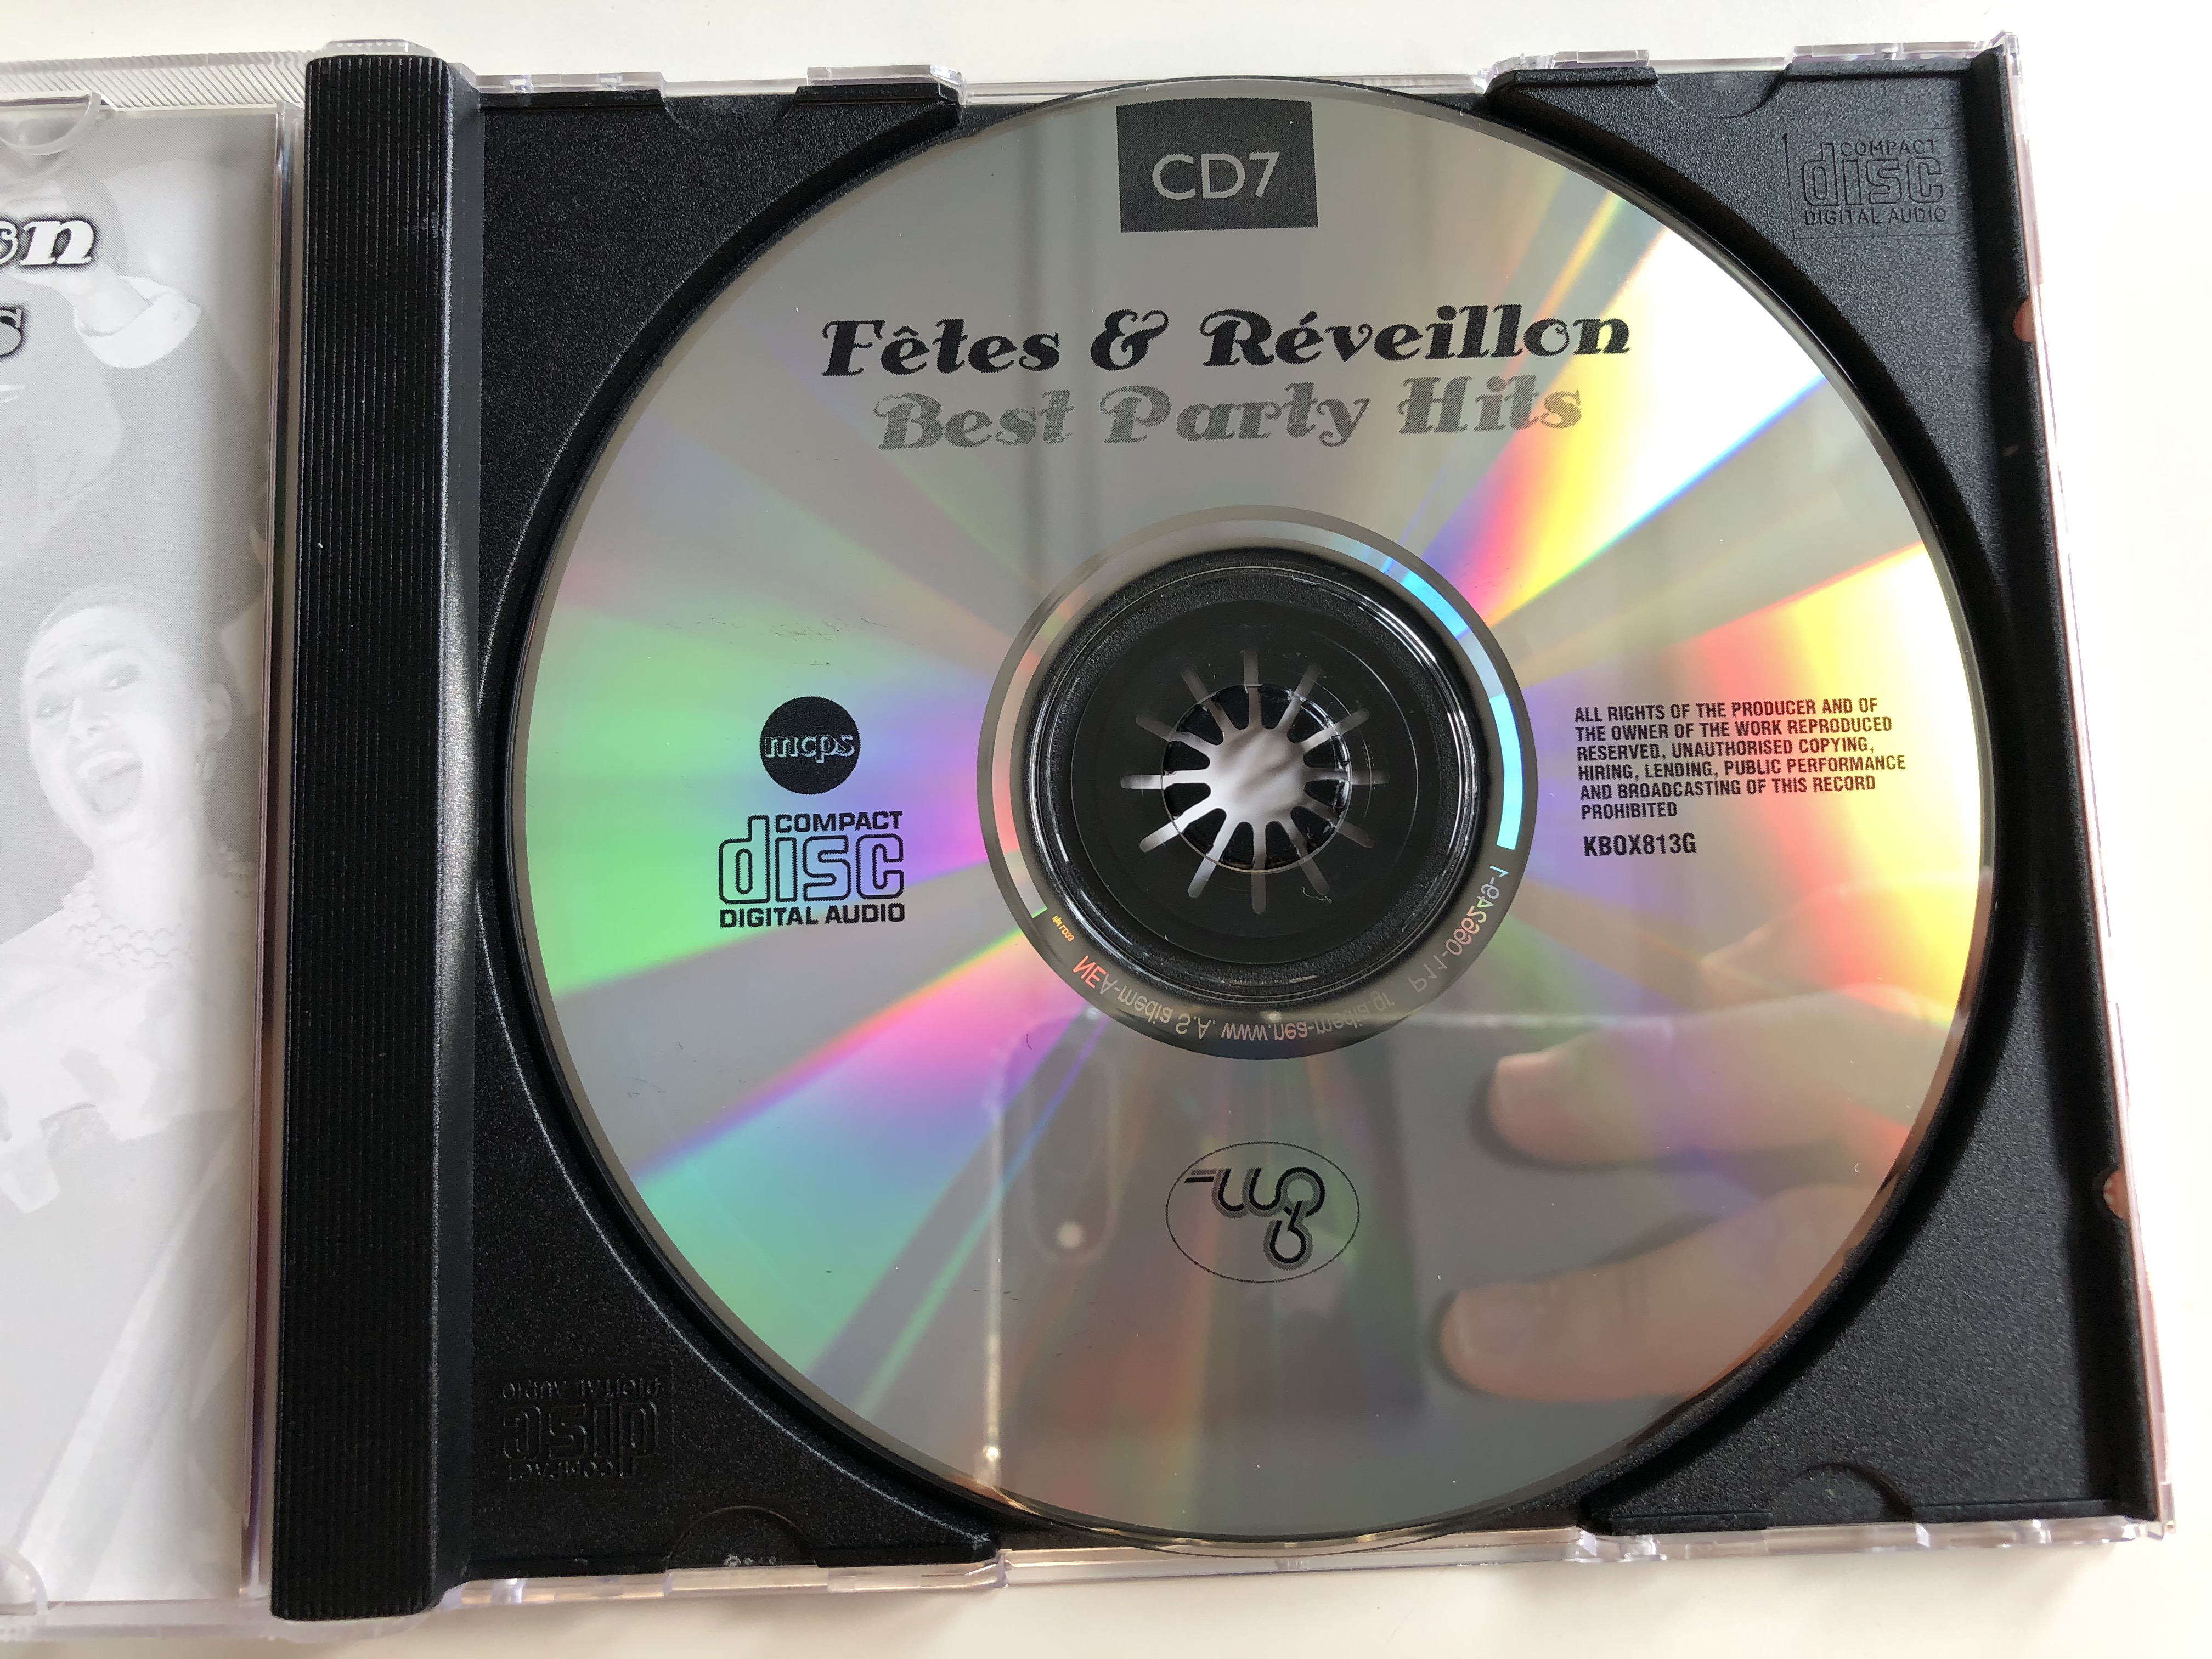 fetes-reveillon-best-party-hits-cd-7-move-on-up-spanish-harlem-soul-man-dancing-in-the-street-baby-get-it-on-knock-on-wood-saturday-night-at-the-movies-audio-cd-2006-kbox813g-3-.jpg